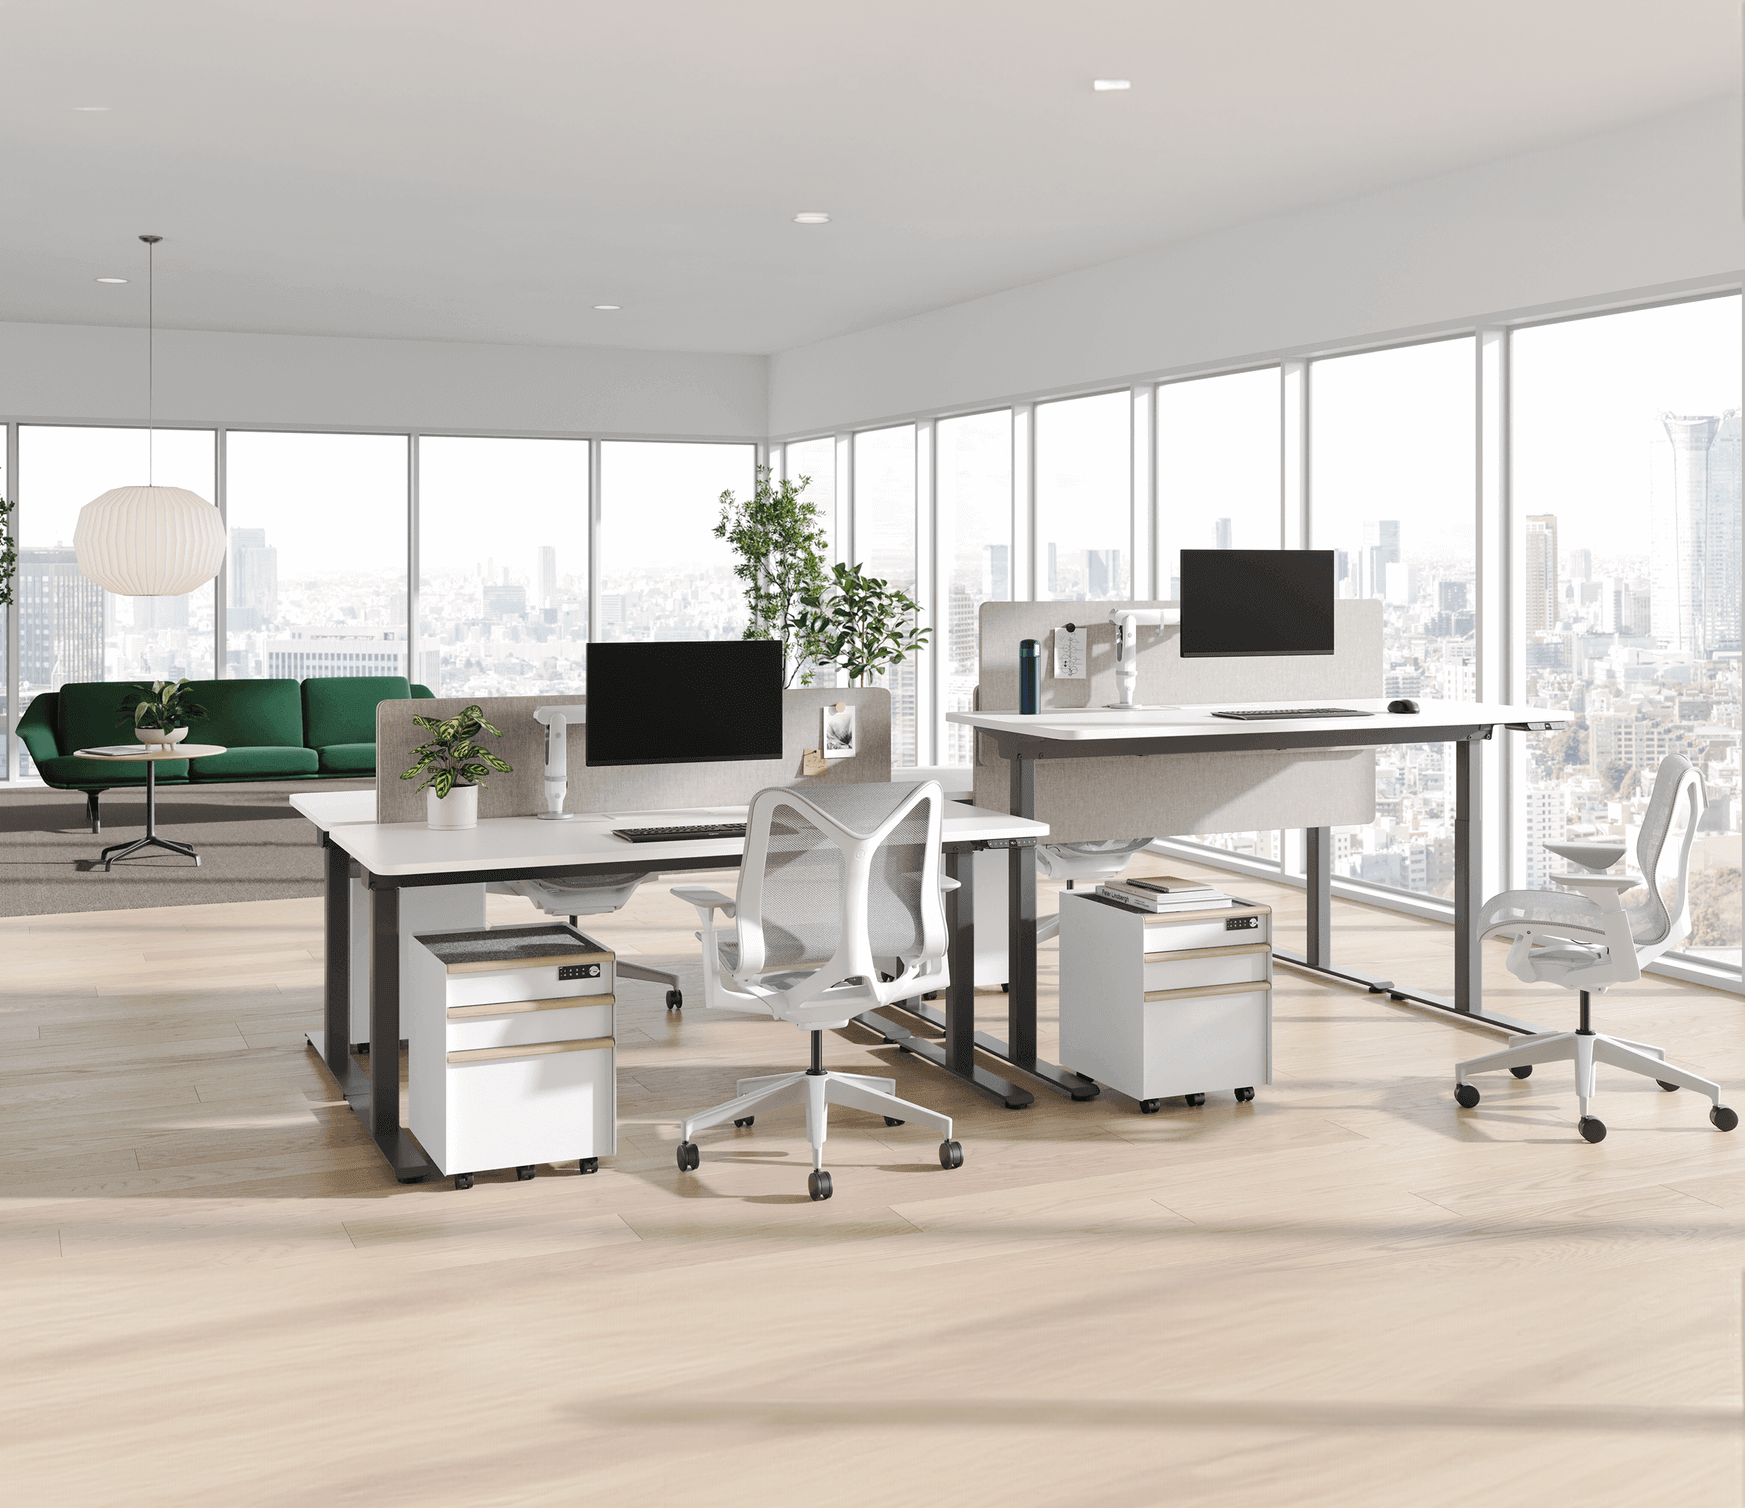 Nevi Sit-To-Stand Desk in a minimalist office design at WorkArena